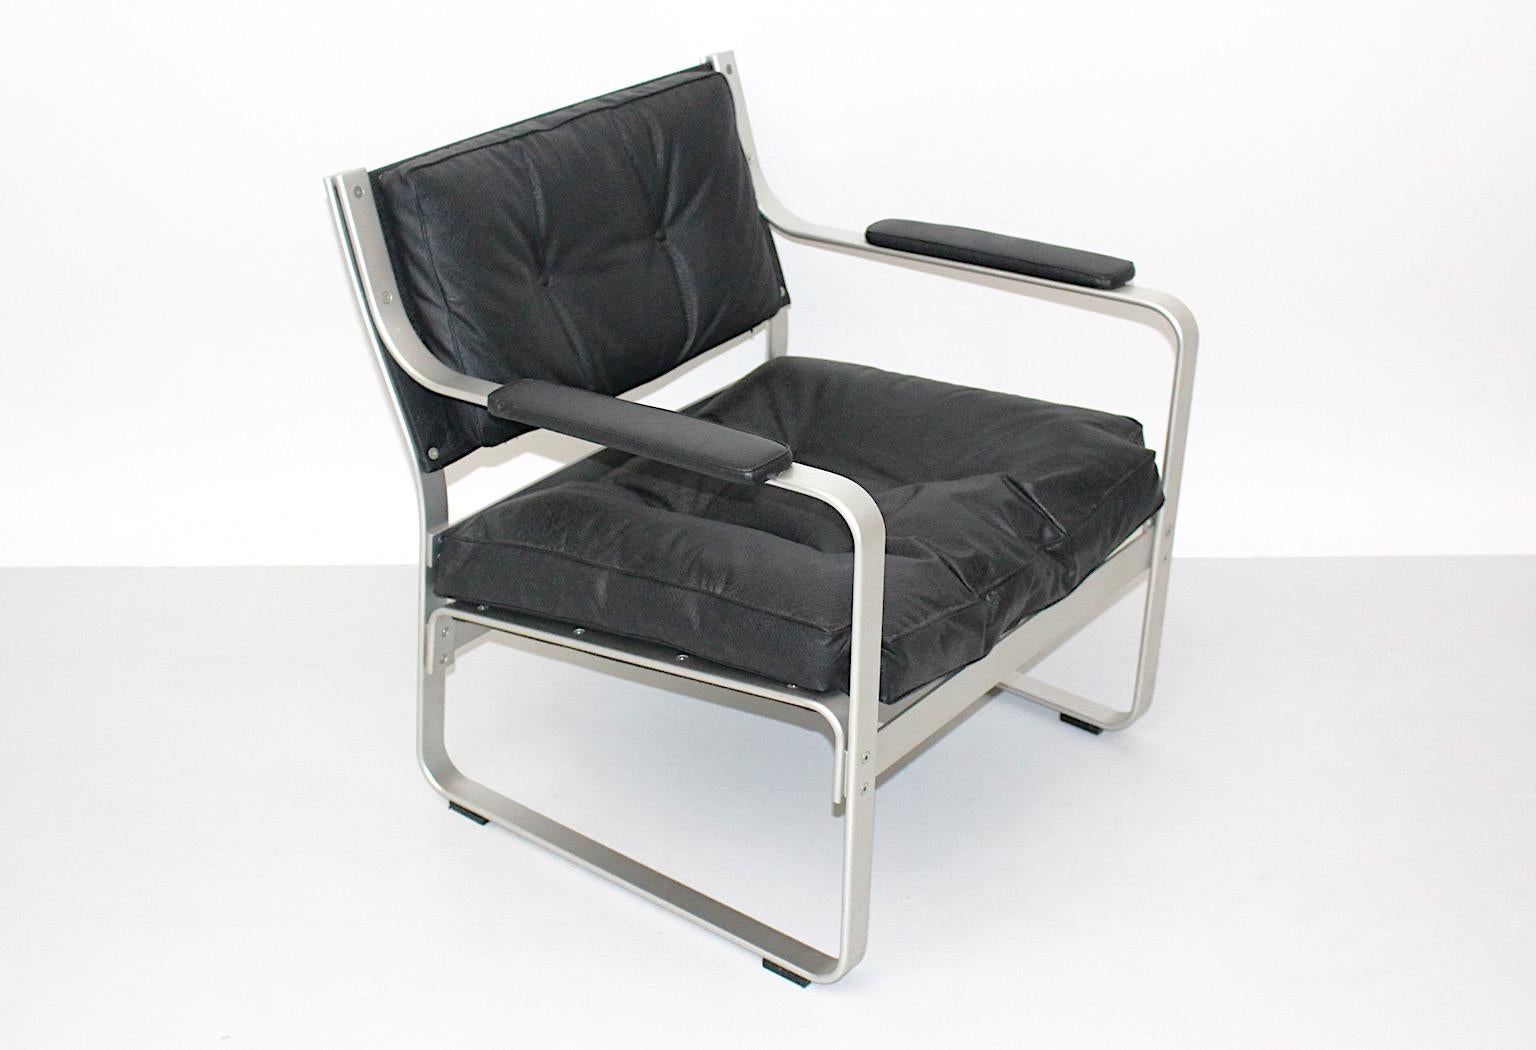 Space Age vintage lounge chair or club chair or side chair from aluminum and black faux leather by
Karl- Erik Ekselius for JOC Vetlanda Sweden.
Throughout its aluminum frame in silver tone the lounge chair spreads a lightweight appearance.
Very